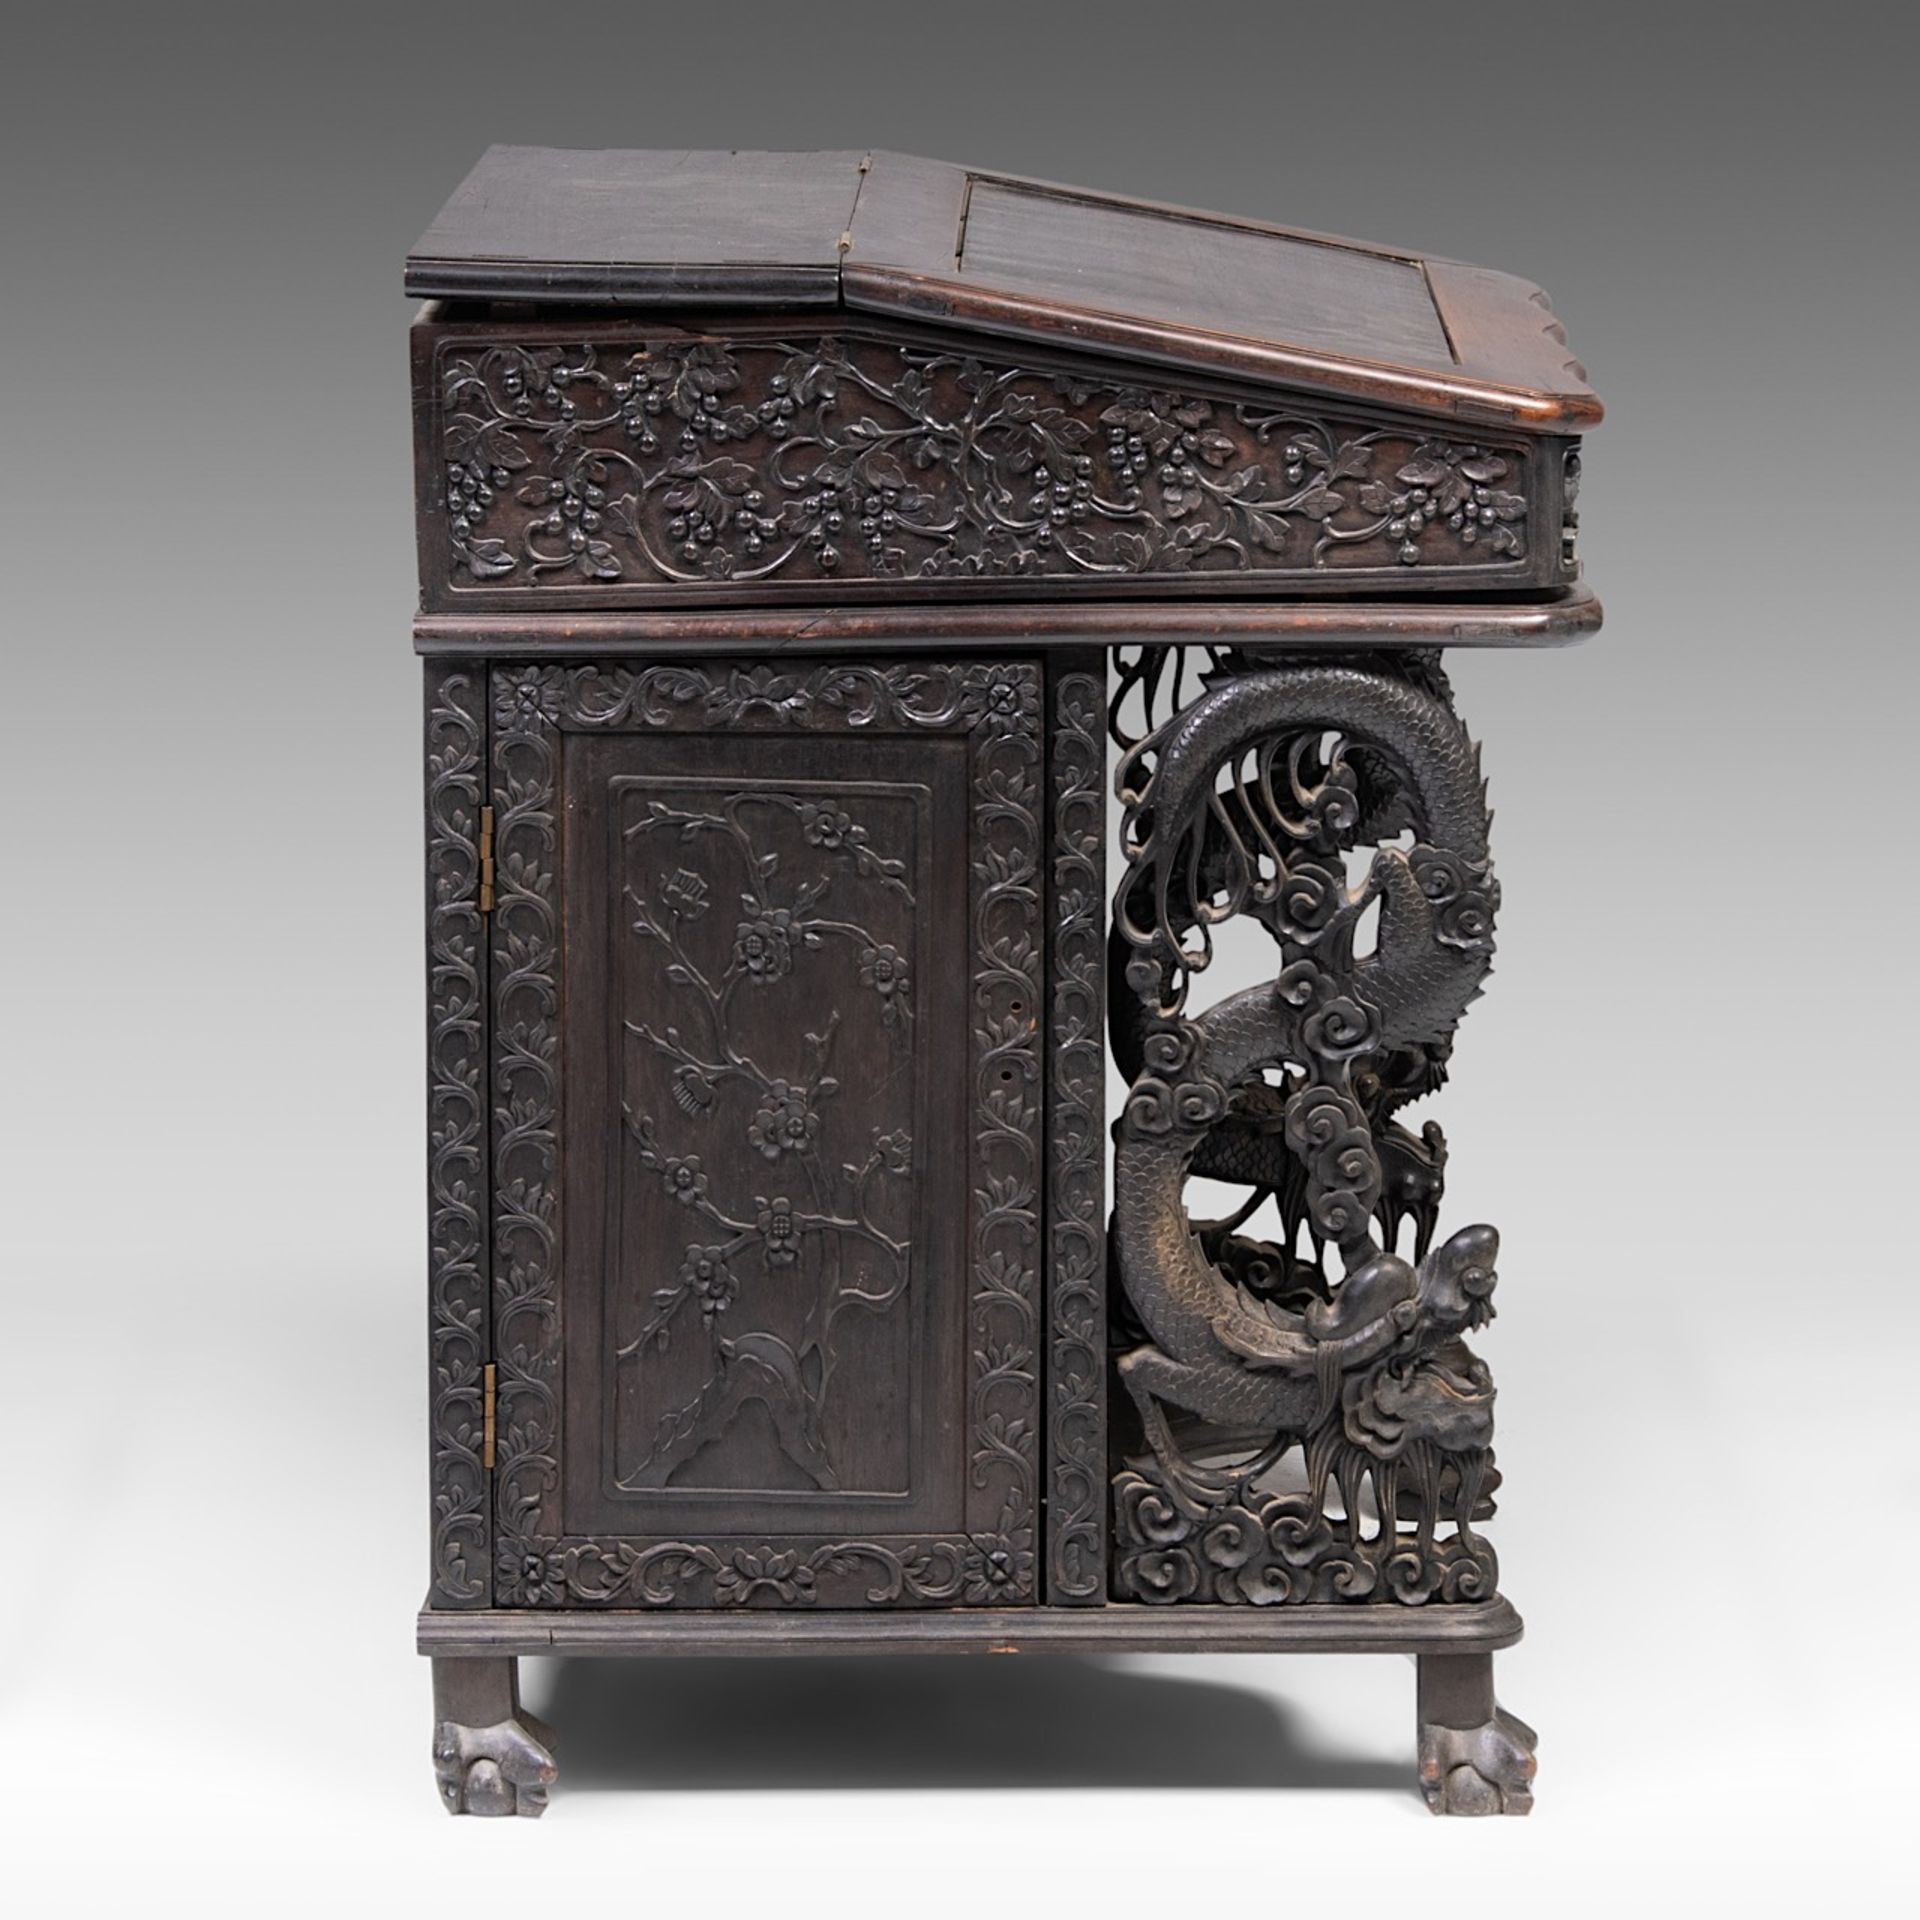 A compact South Chinese carved hardwood writing desk, 19thC, H 83 - W 66 - D 62 cm - Bild 6 aus 10